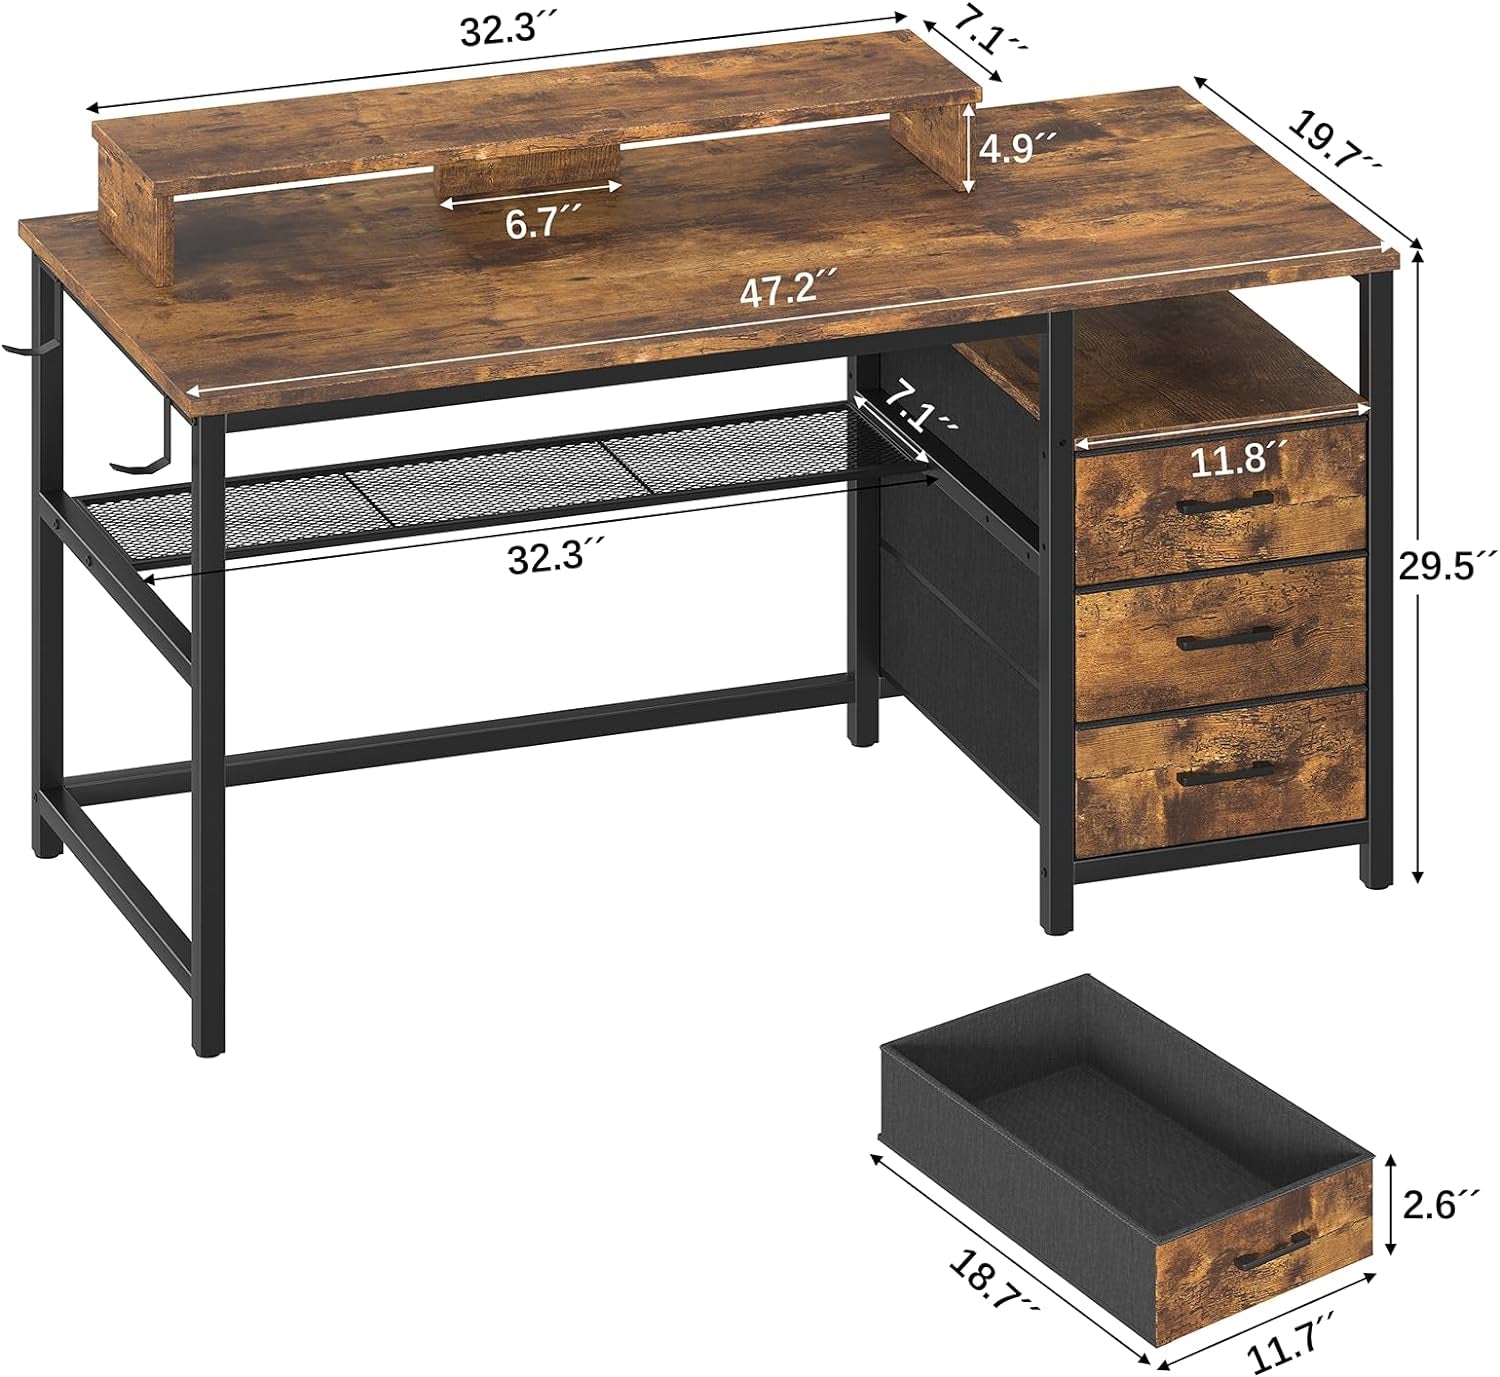 3 Drawer Computer Desk, Office Desk with Monitor Stand & Fabric Drawers, Writing Gaming Table with Storage Drawer for Home Office, Modern Workstation